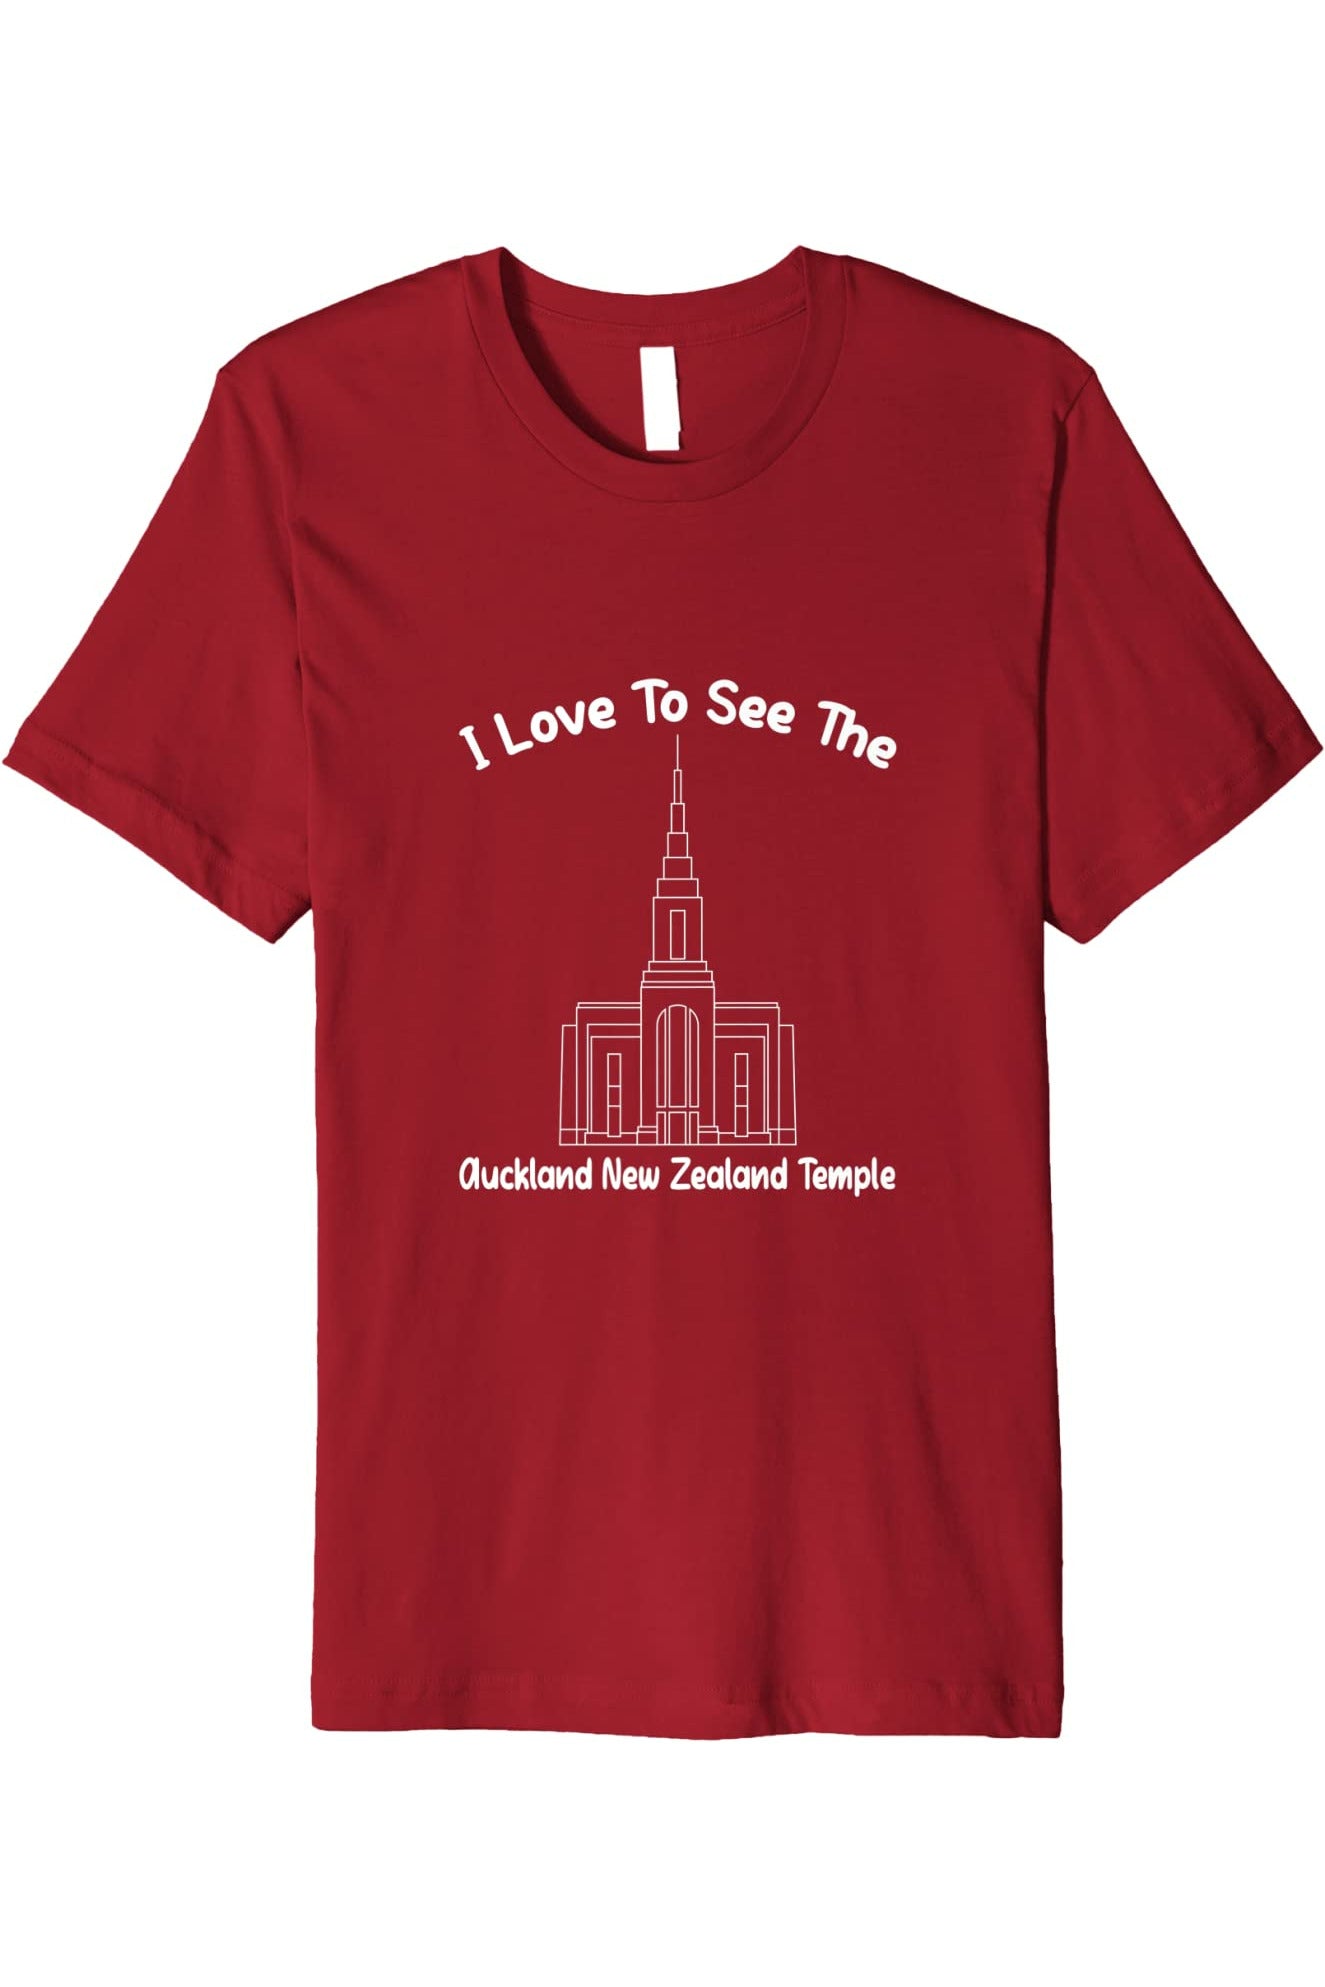 Auckland New Zealand Temple T-Shirt - Premium - Primary Style (English) US